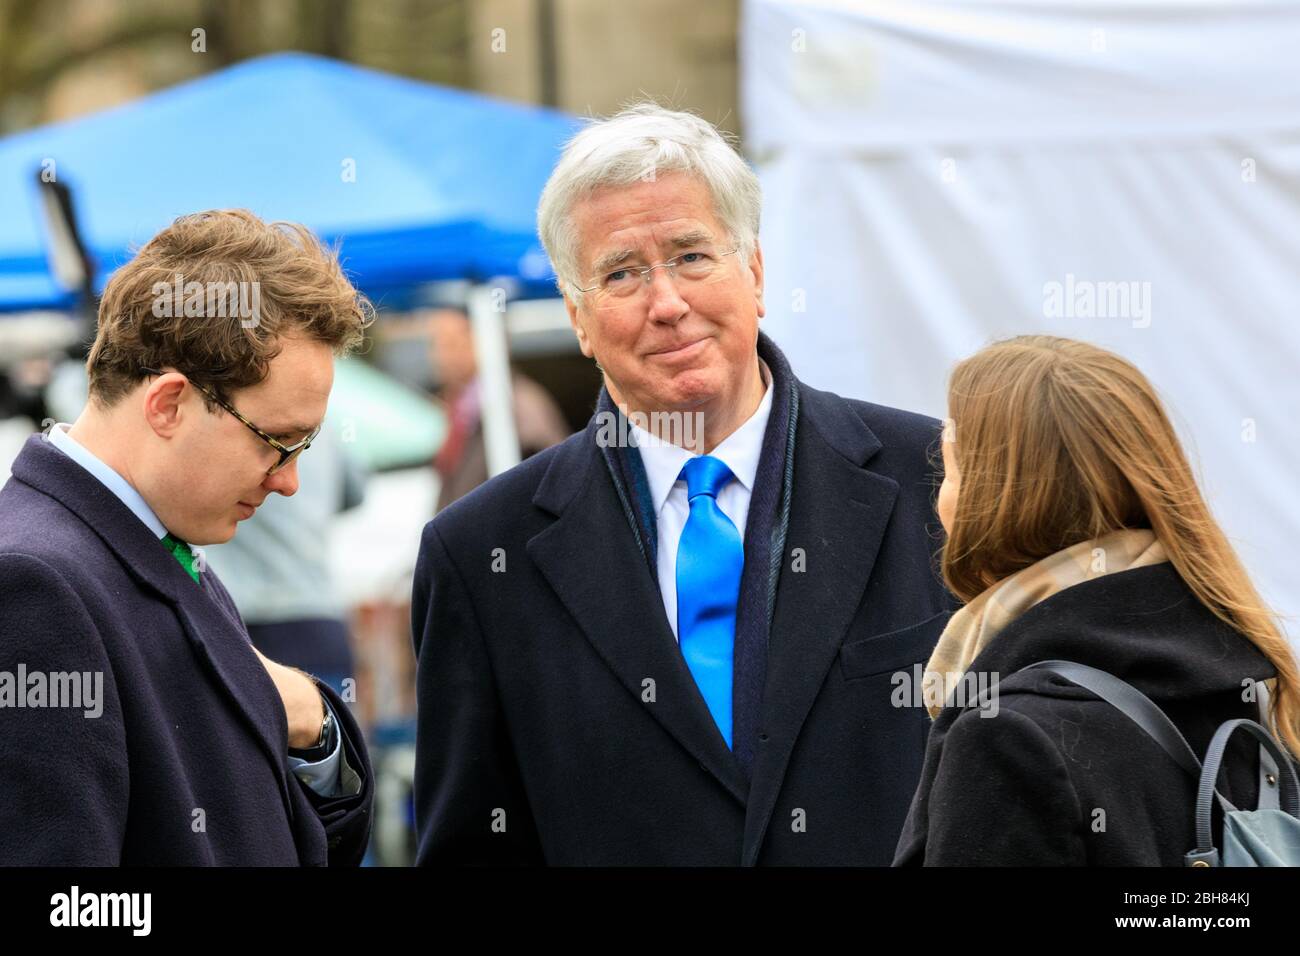 Sir Michael Fallon, MP, Member of Parliament and British Conservative Party politician, interviewed, Westminster, London, UK Stock Photo